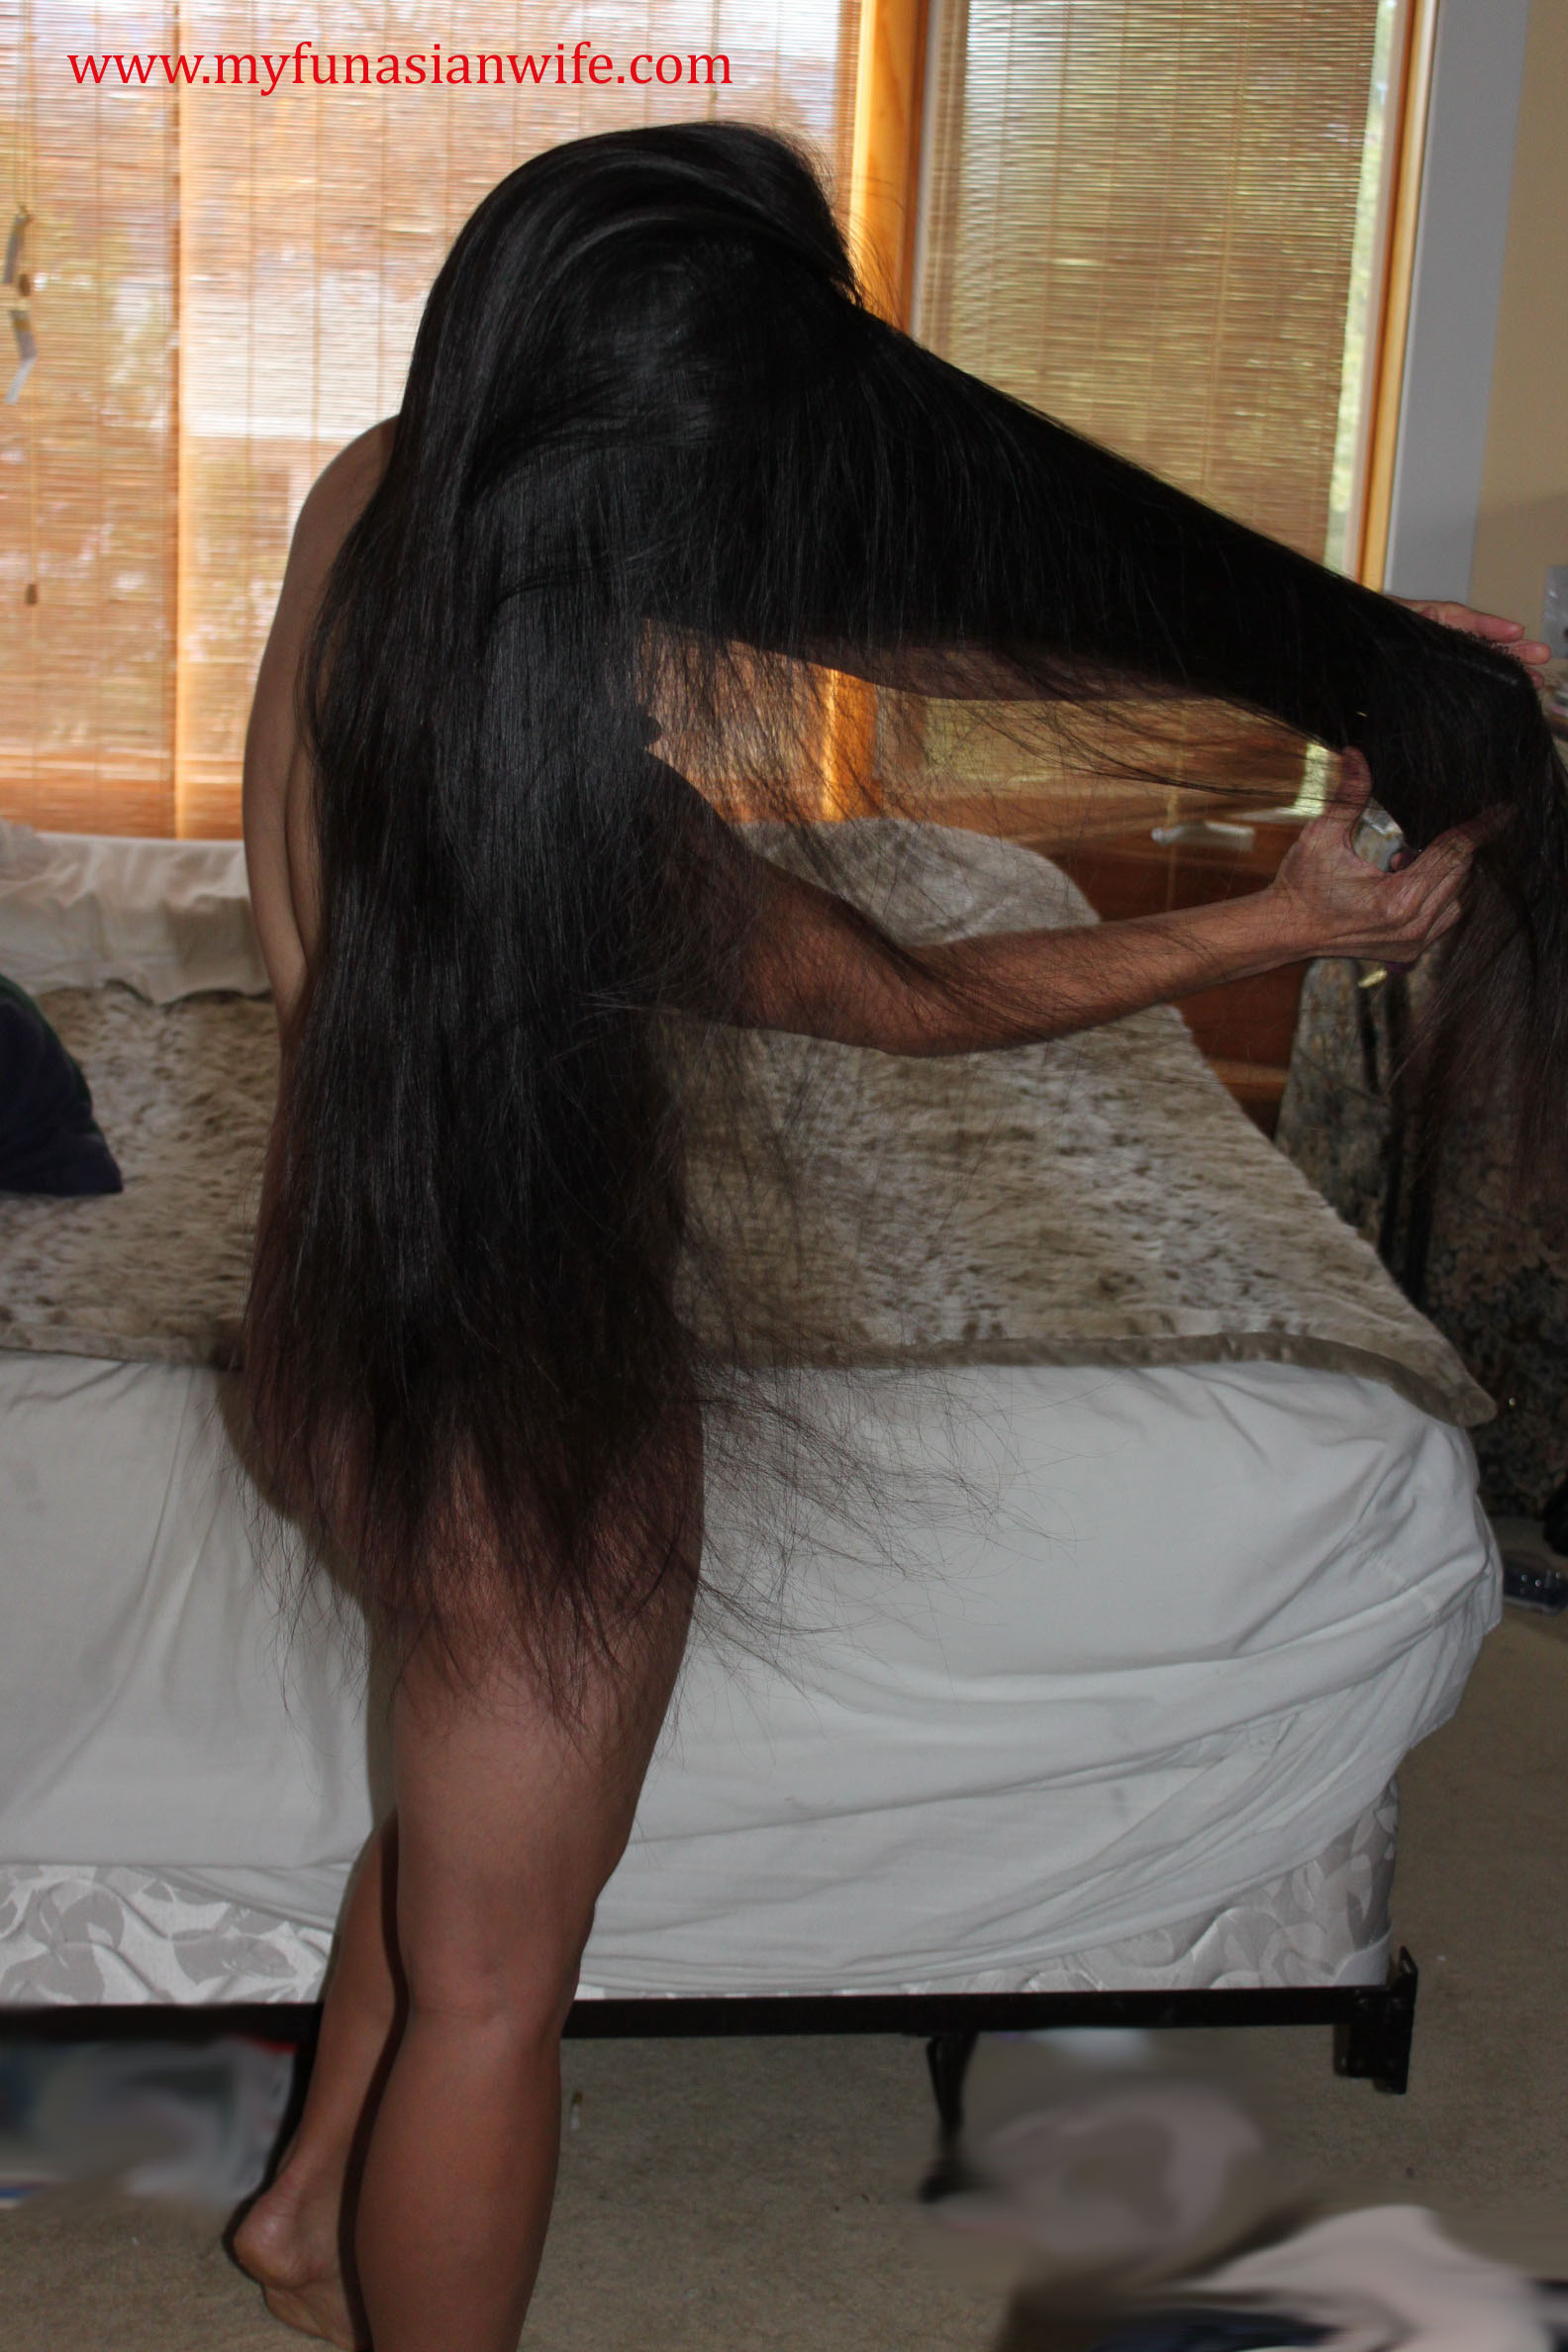 Long Hair Cam Girls. image hosted at: http://www.myfunasianwife.com/Sets/Ga...